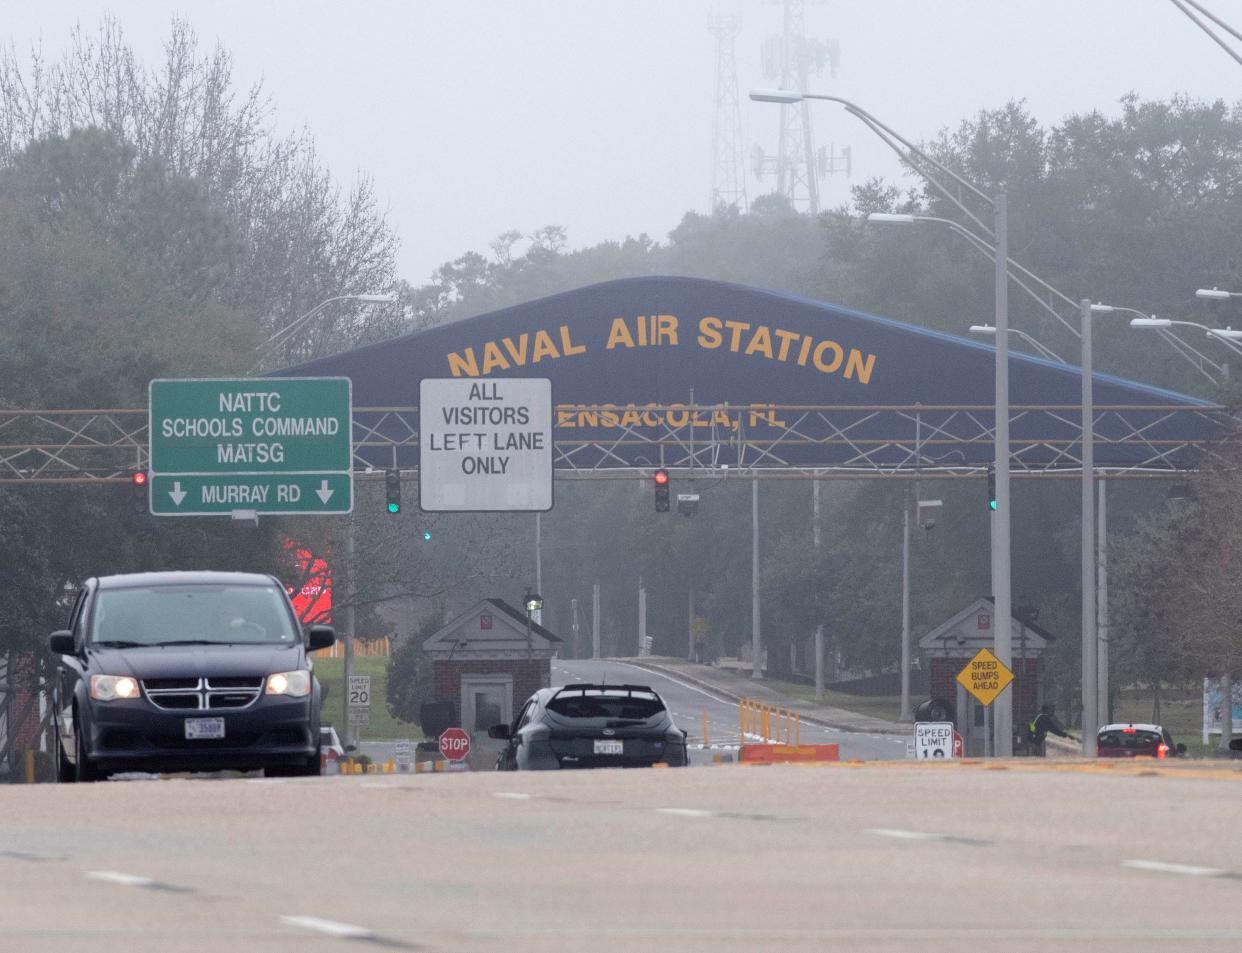 Naval Air Station Pensacola remains under a heightened sense of security on Monday. Jan. 13, 2020. During a press conference in Washington, U.S. Attorney General William Barr and FBI Deputy Director David Bowdich revealed the findings of a monthlong investigation into the motivations of the NAS Pensacola shooter.